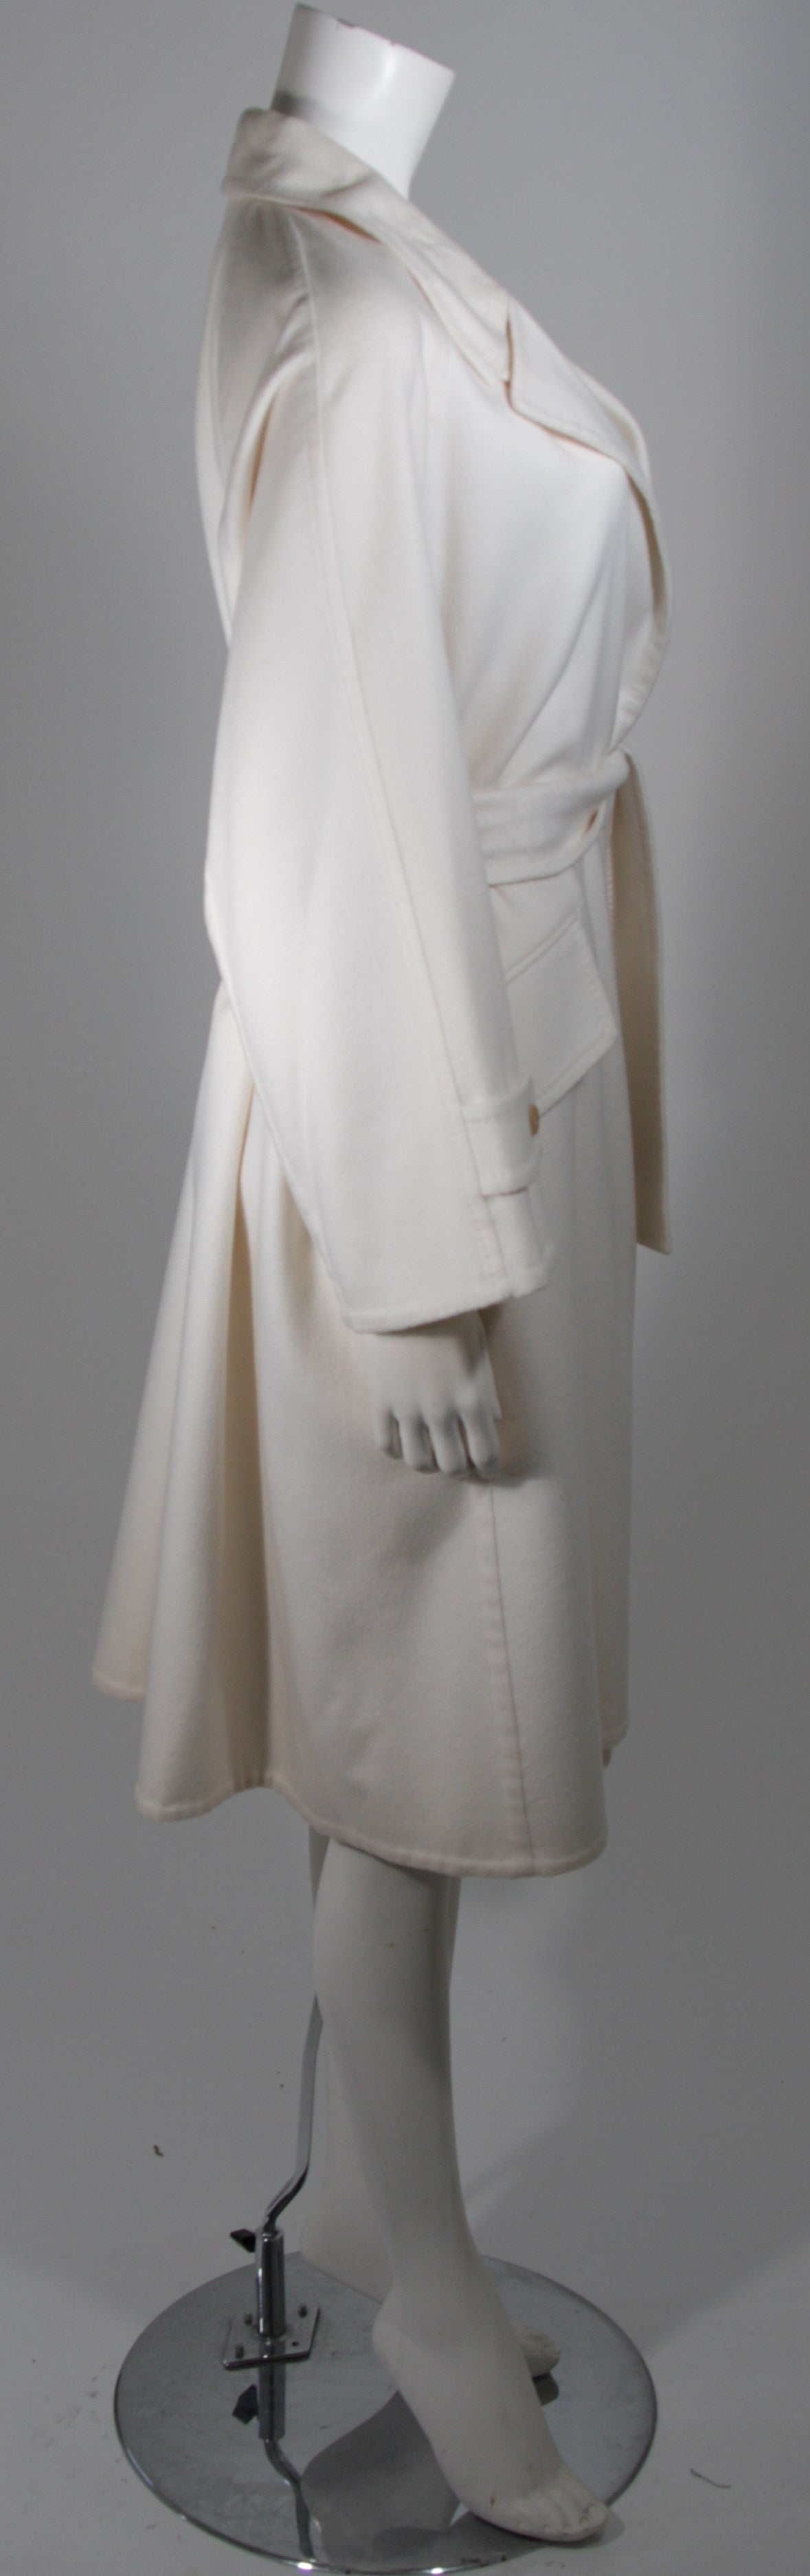 Women's Yves Saint Laurent Cream/White Cashmere Belted Trench Coat NWT For Sale